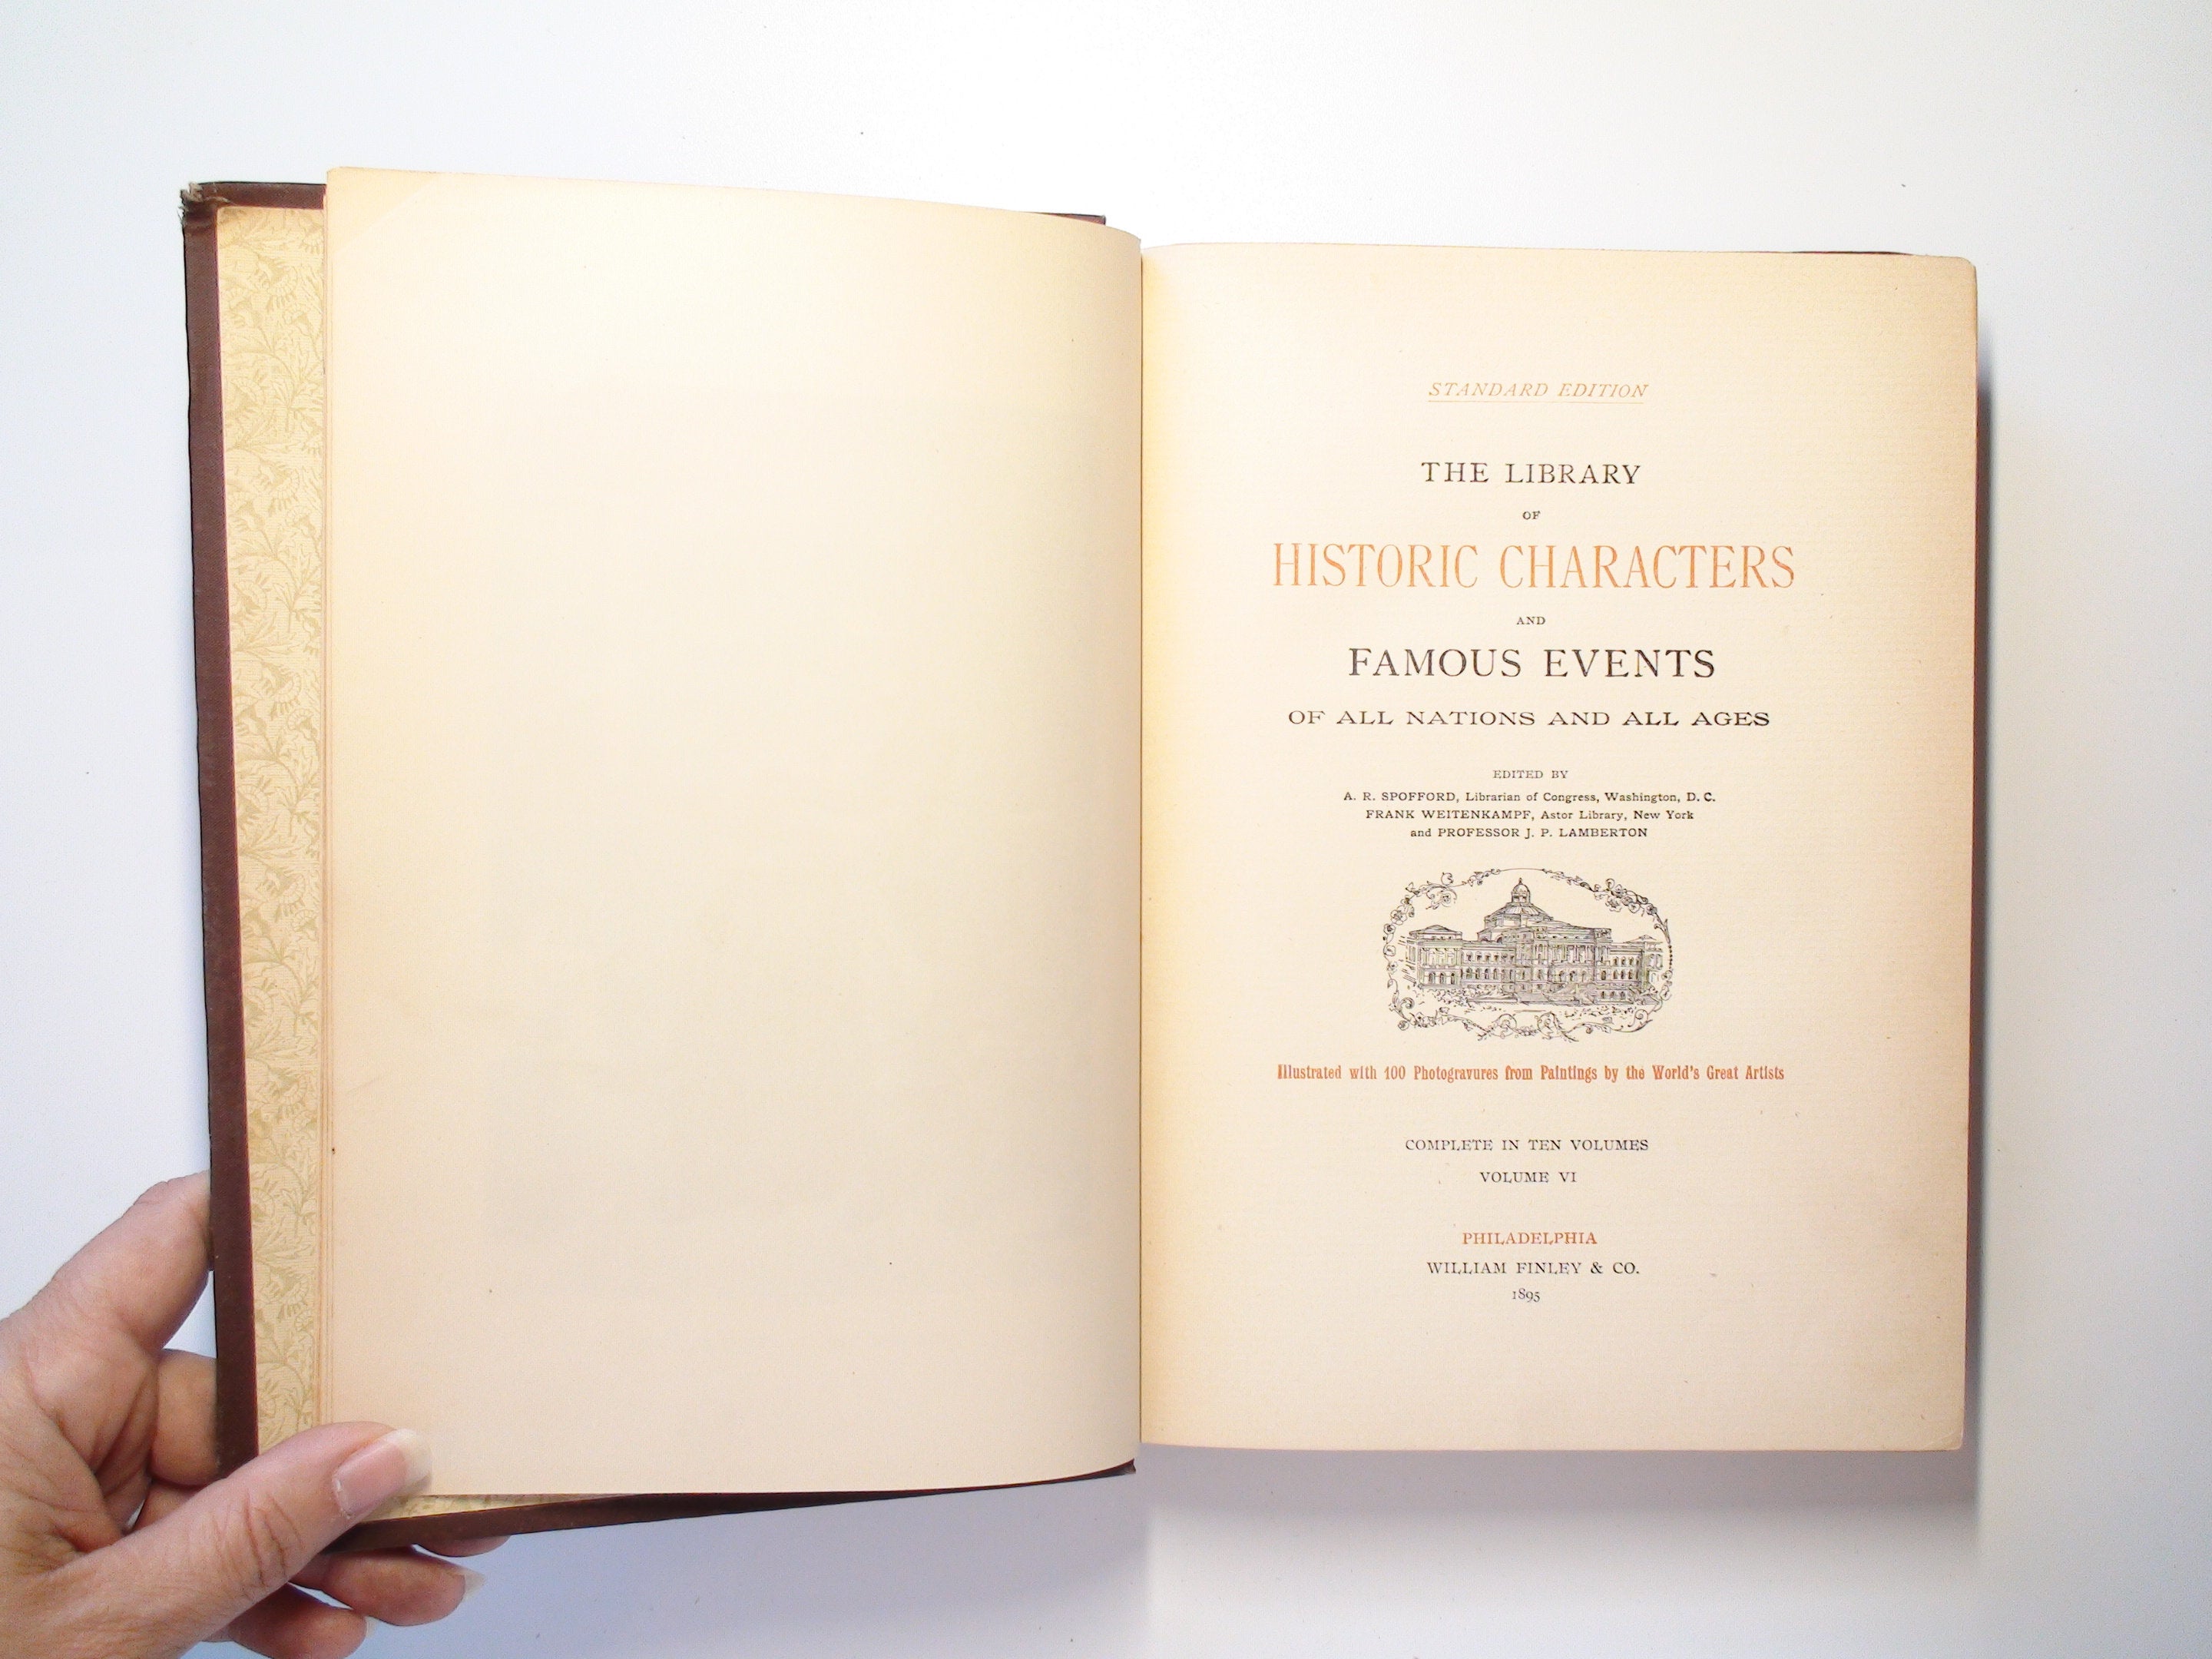 The Library of Historic Characters and Famous Events, Illustrated, Vol VI, 1895